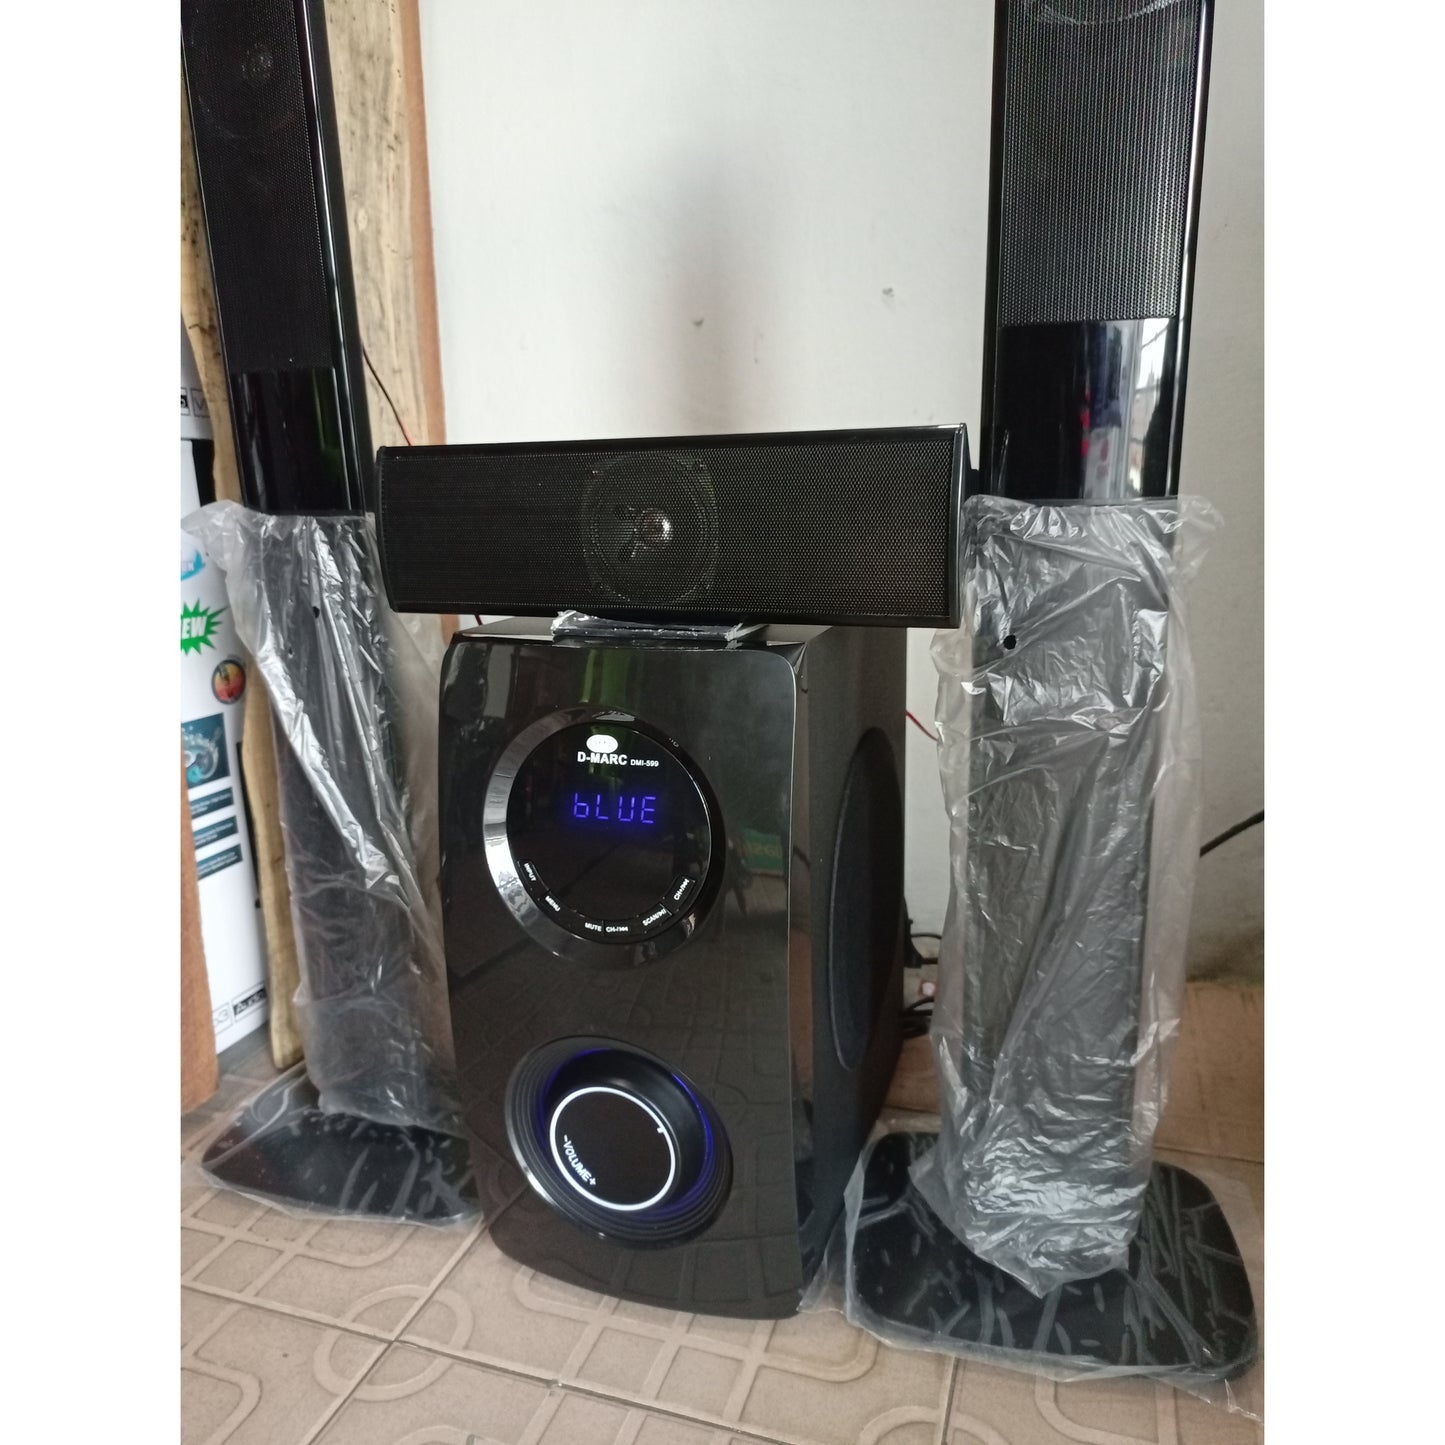 DMARC 3.1Ch DMI-599 Standing Bluetooth Home Theater Speaker System